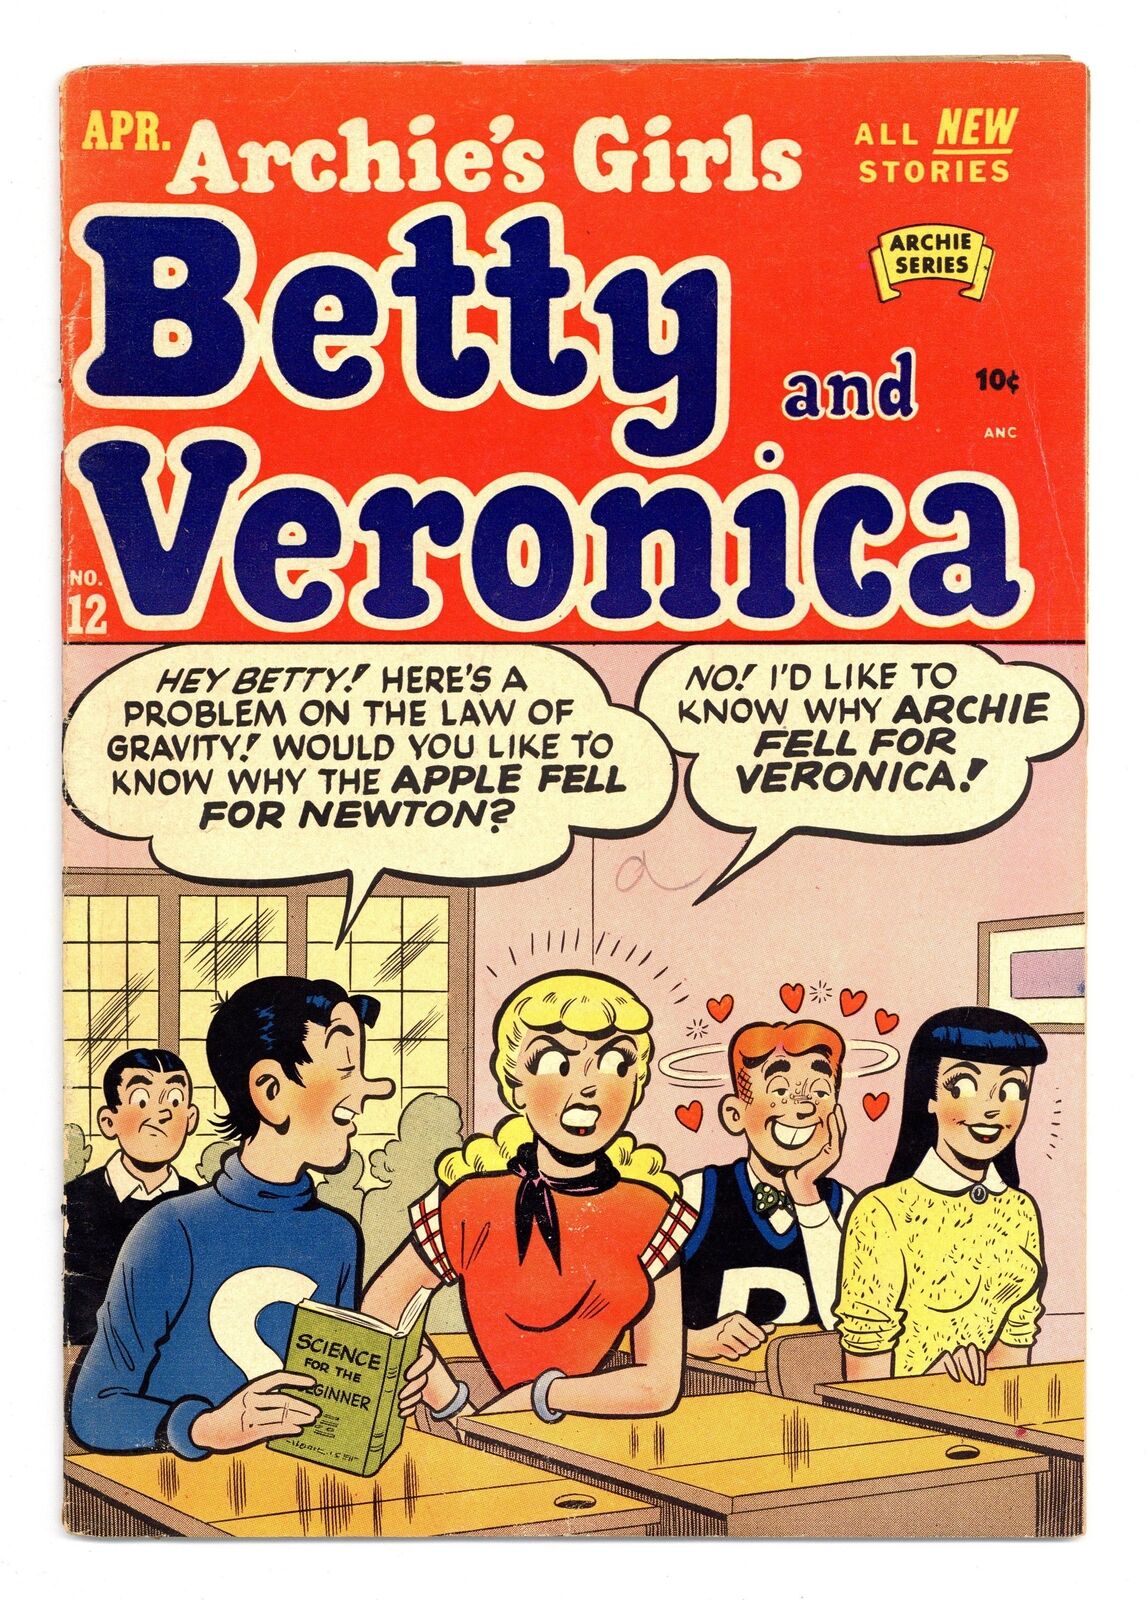 Archie's Girls Betty and Veronica #12 VG 4.0 1954